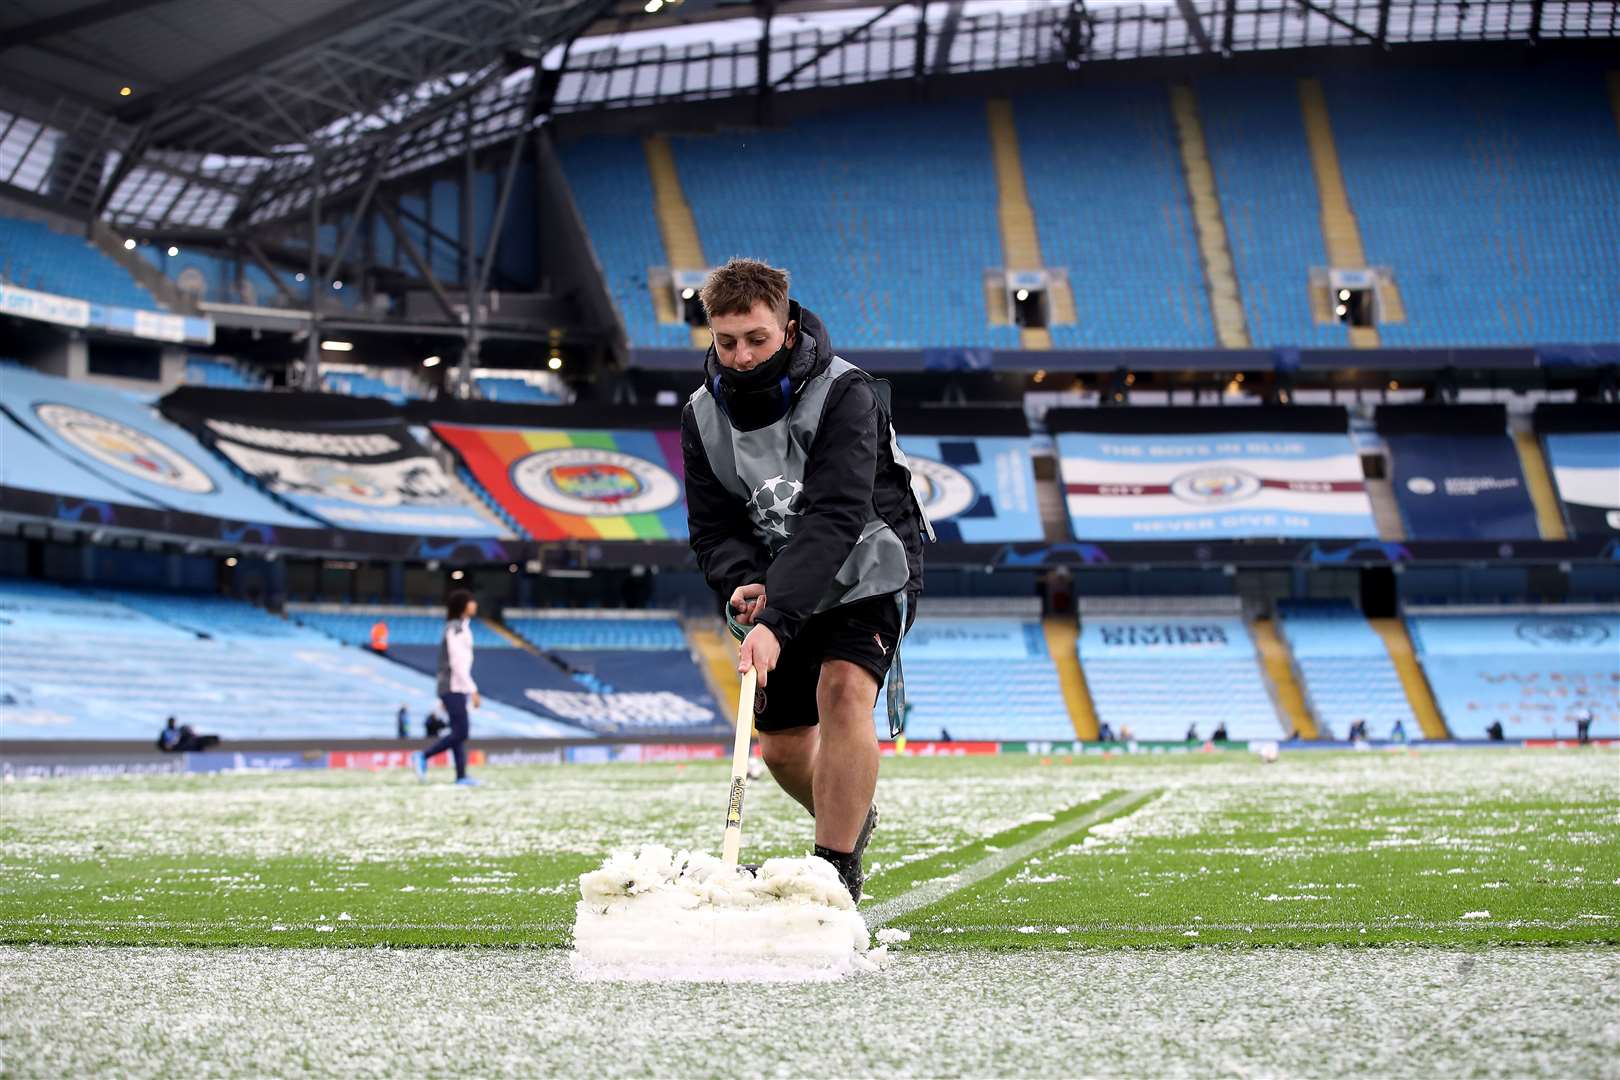 The wintry conditions meant extra work for ground staff at the Etihad Stadium (Martin Rickett/PA)